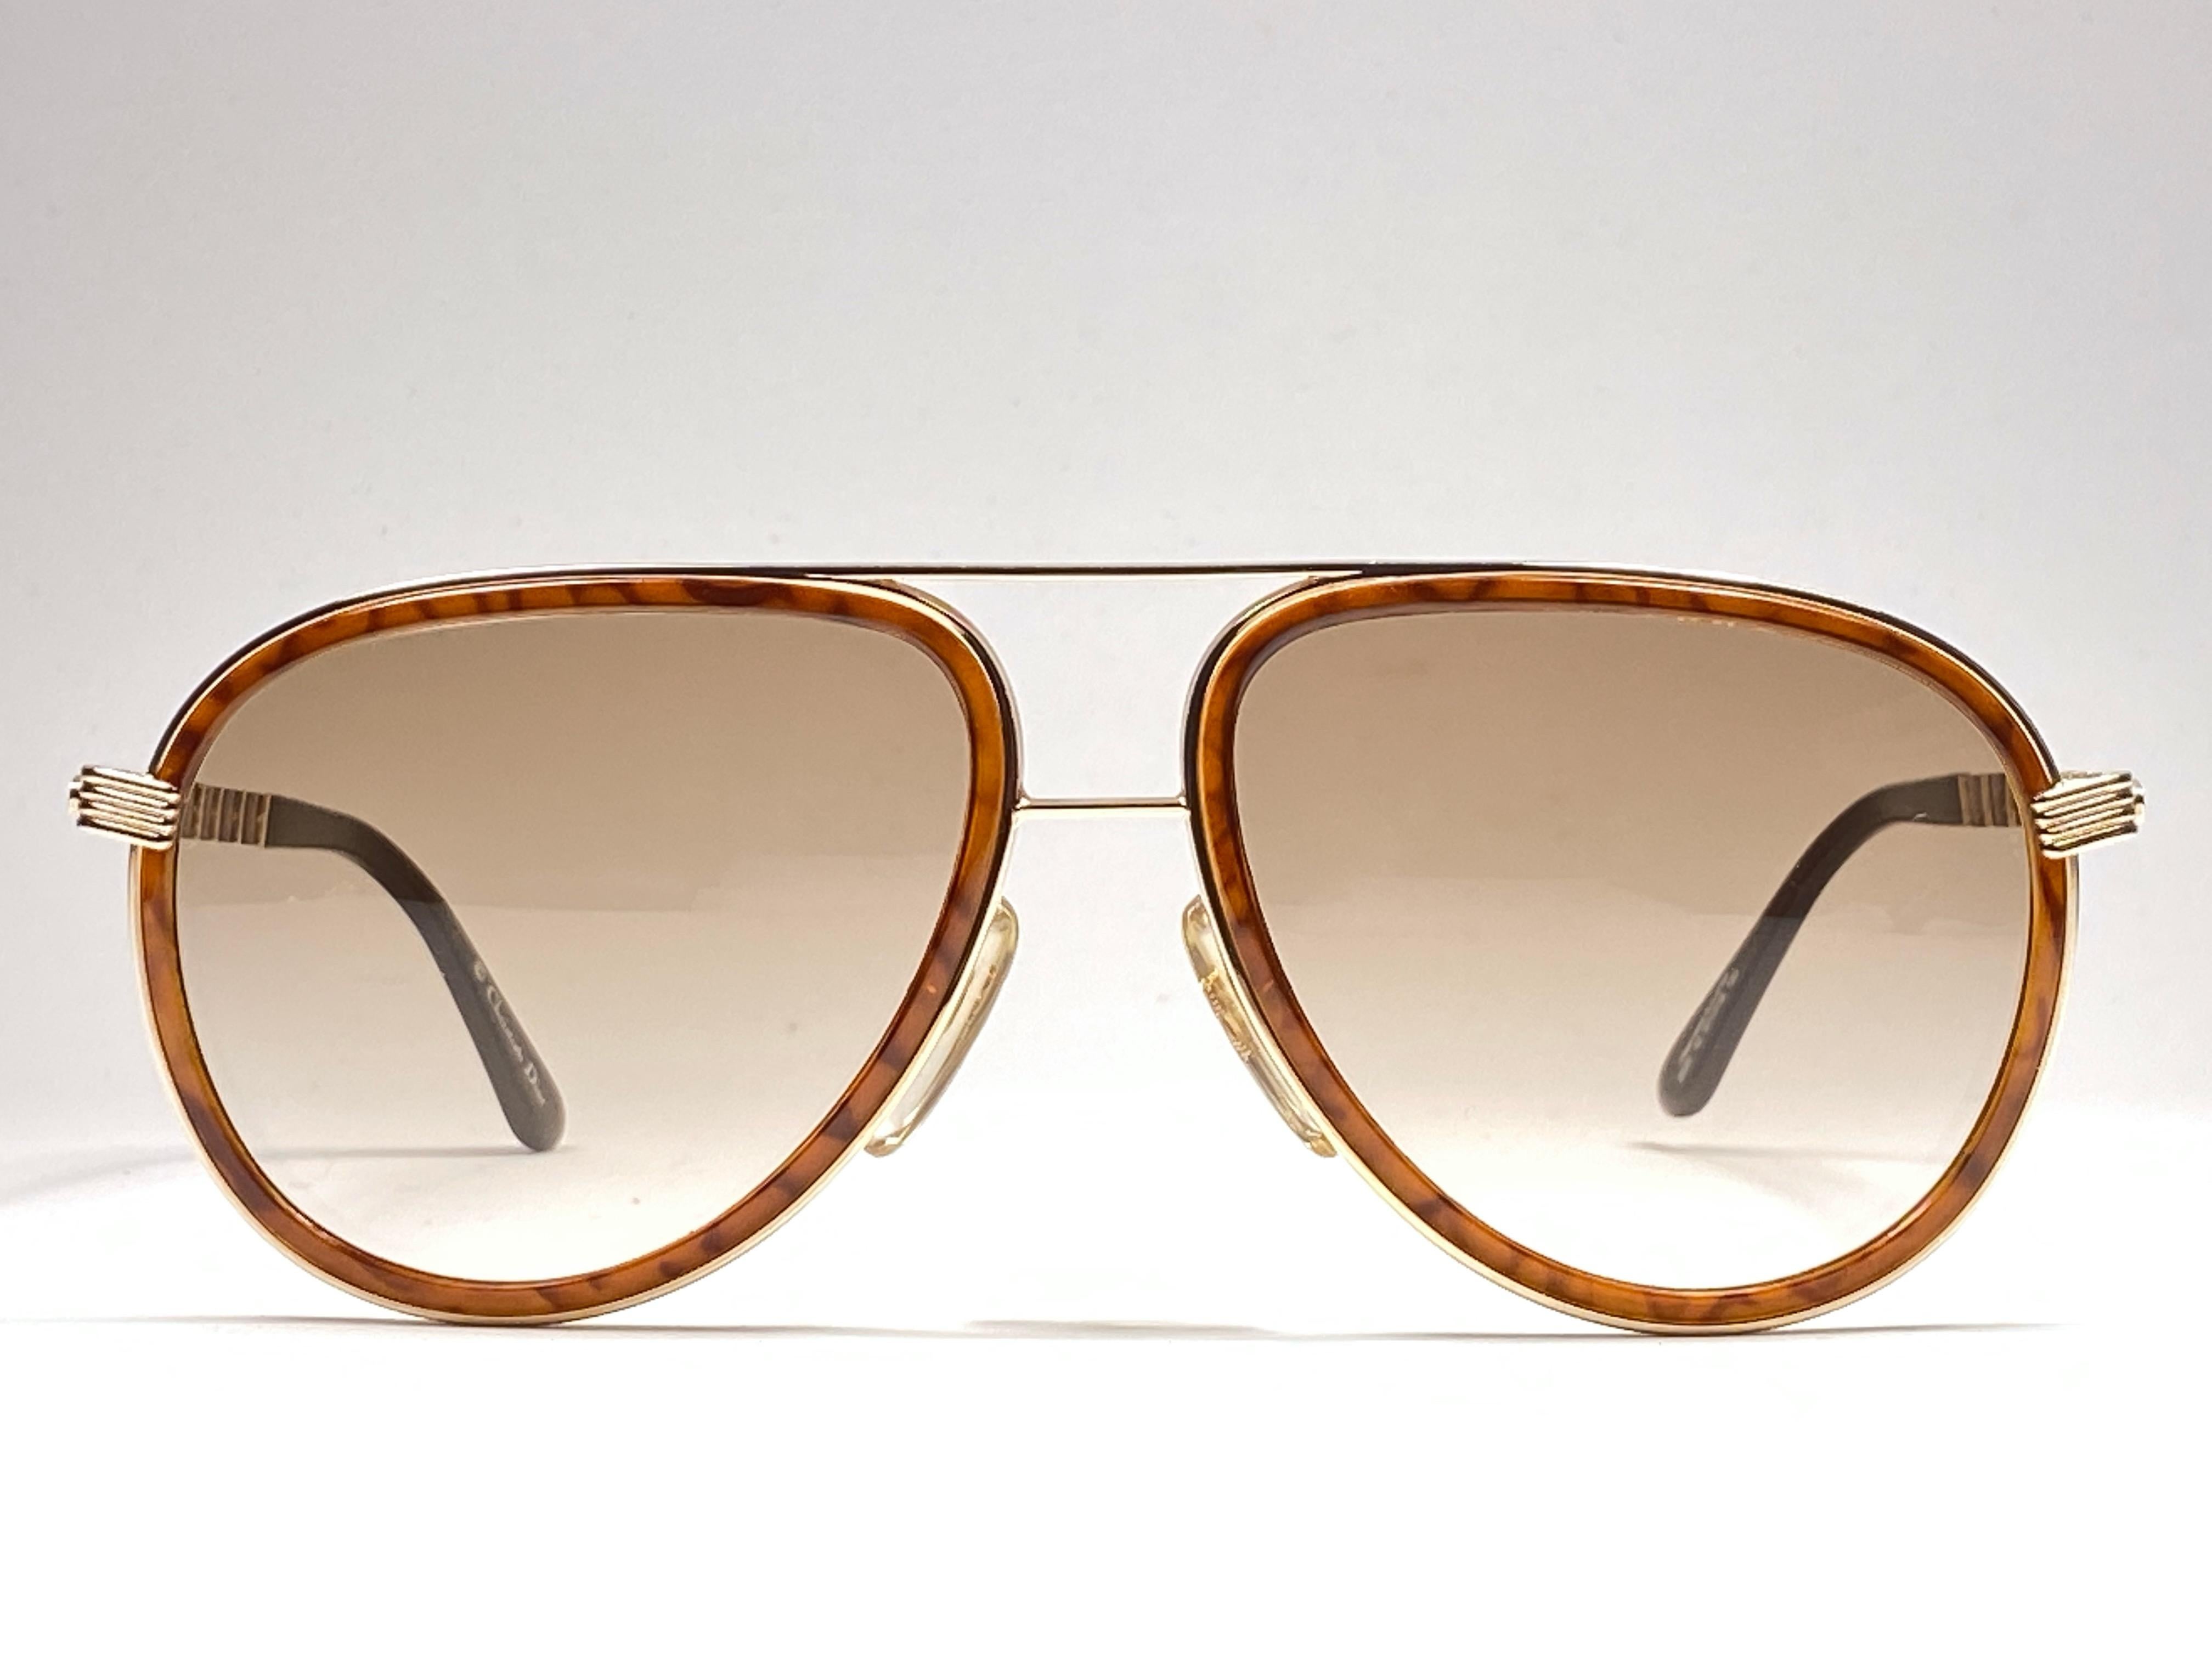 New vintage Christian Dior Monsieur sunglasses. .

Spotless brown gradient lenses.
New, never worn or displayed this item may show light sign of wear due to storage.

Made in Austria

MEASUREMENTS :

FRONT : 13.5 CMS

LENS HEIGHT : 4.8 CMS 

LENS